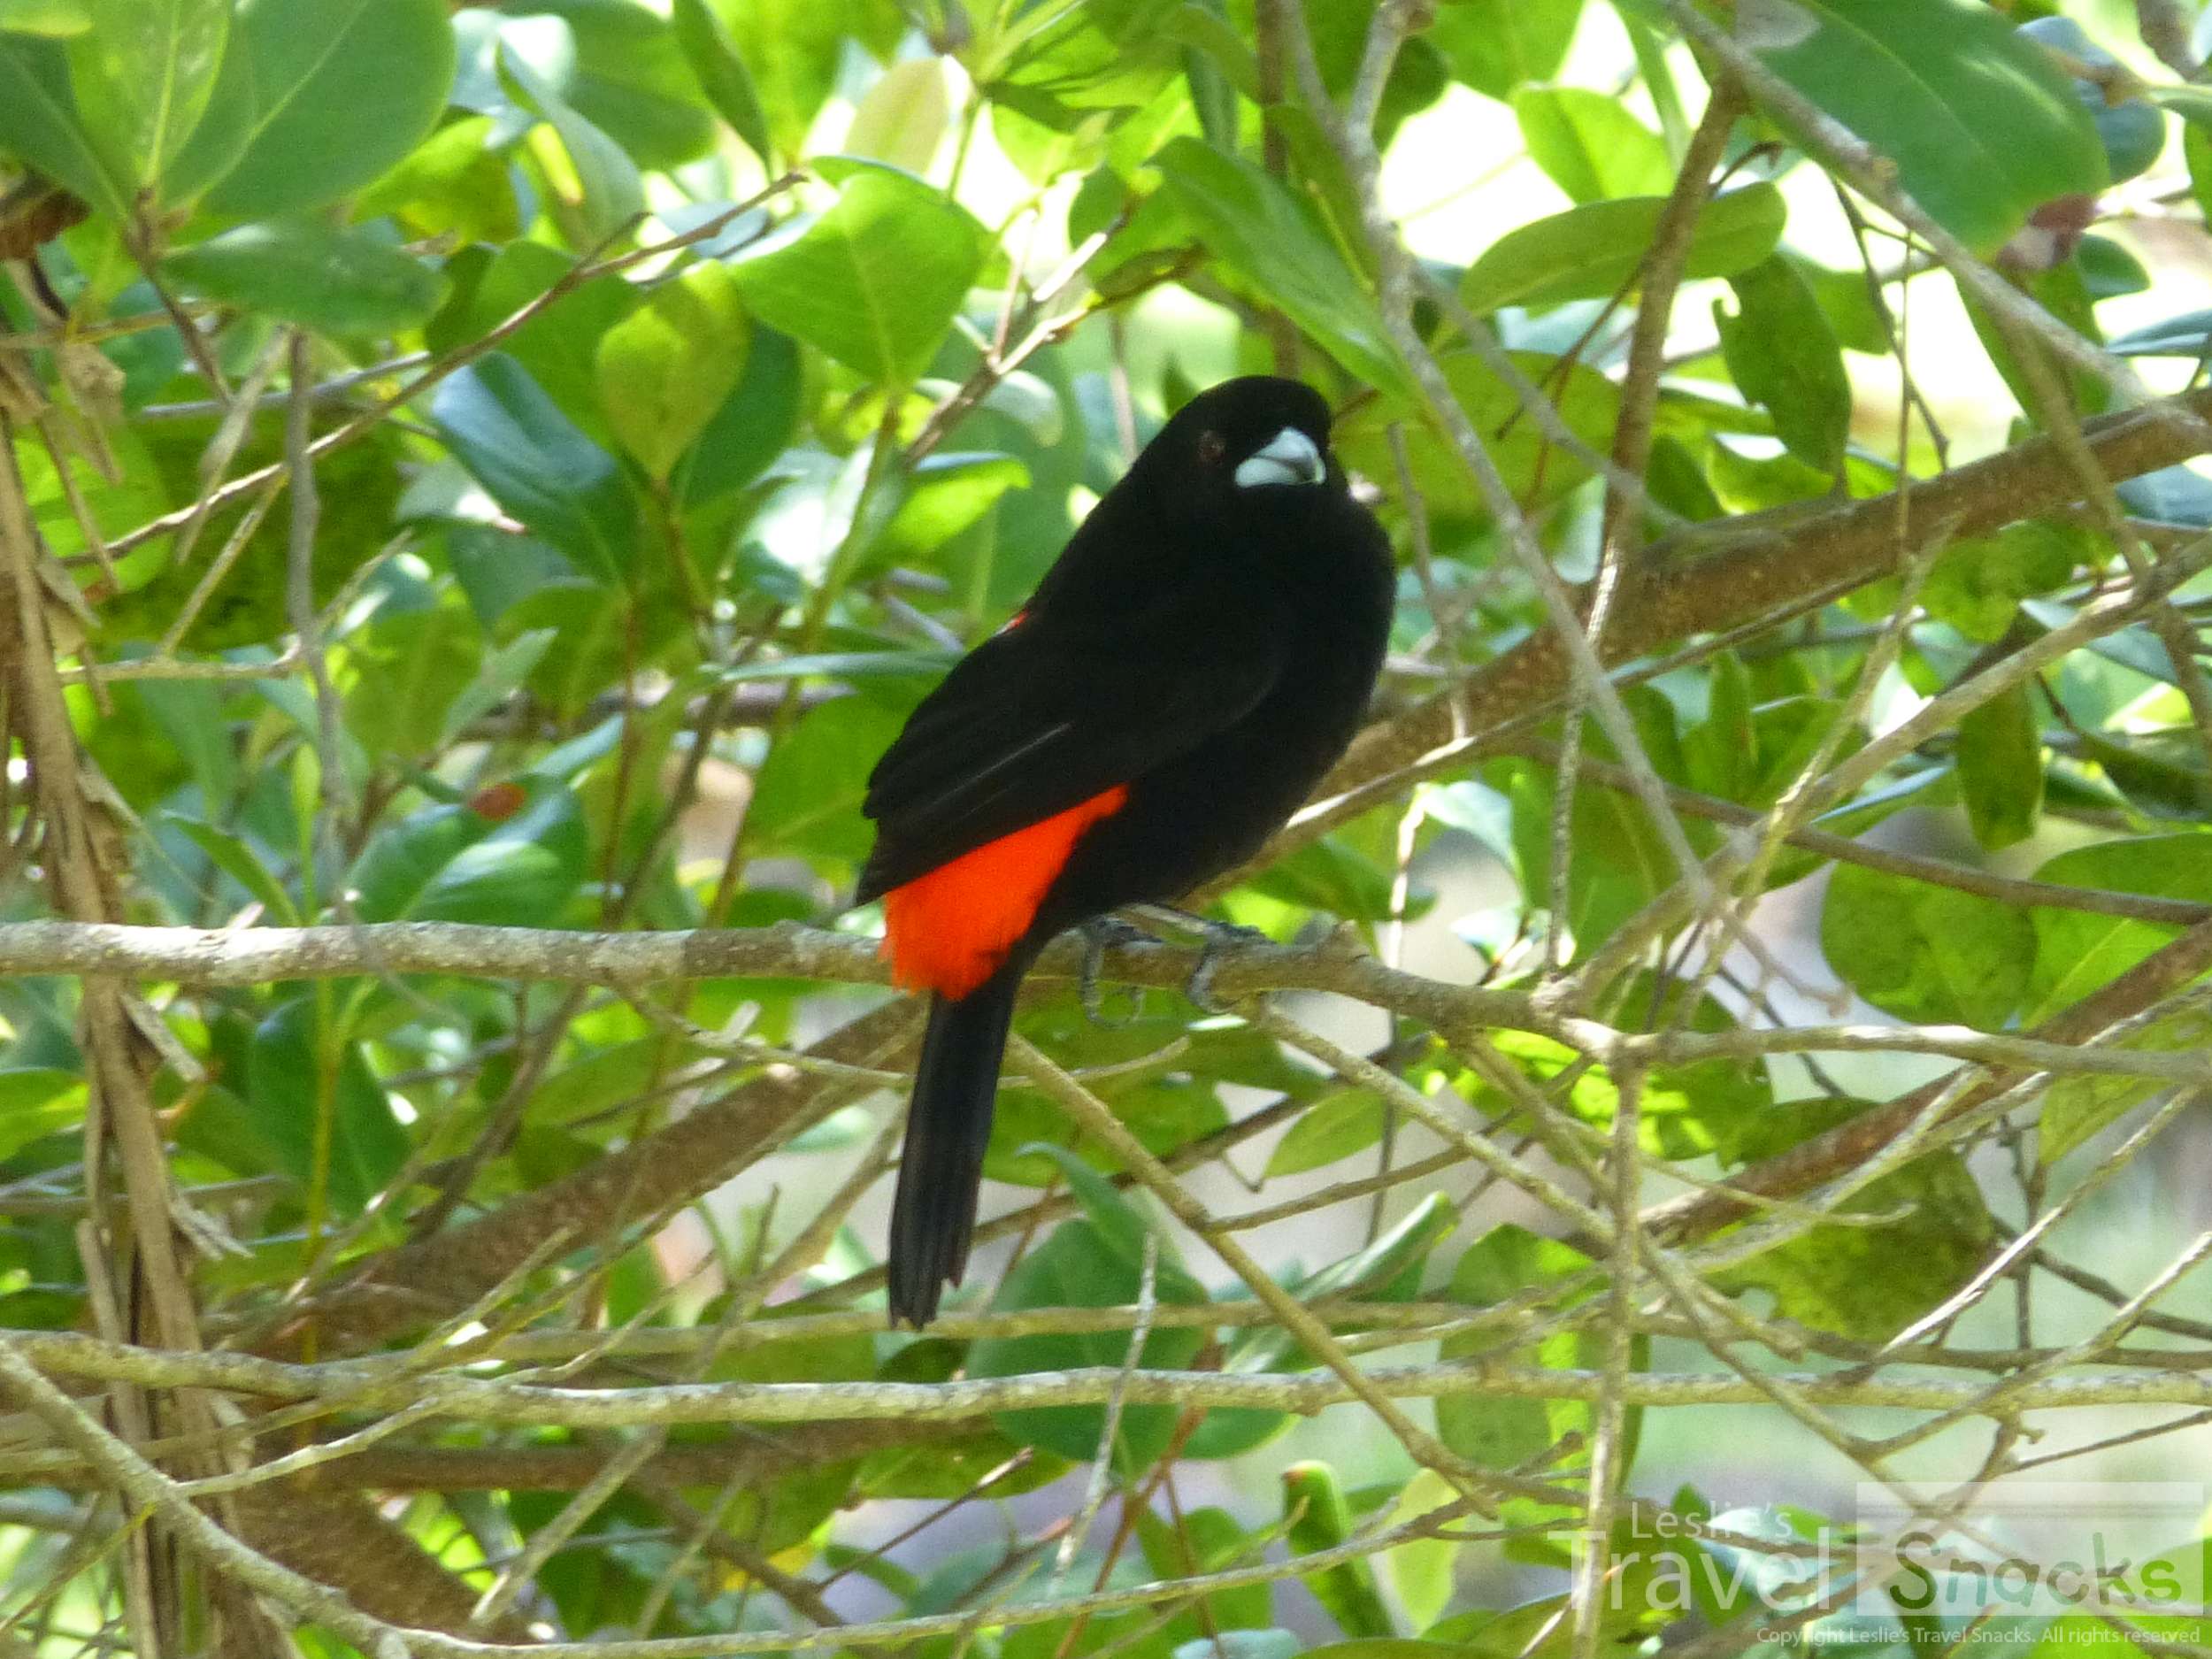 I also love the Scarlet-rumped (Passerini's) Tanagers  